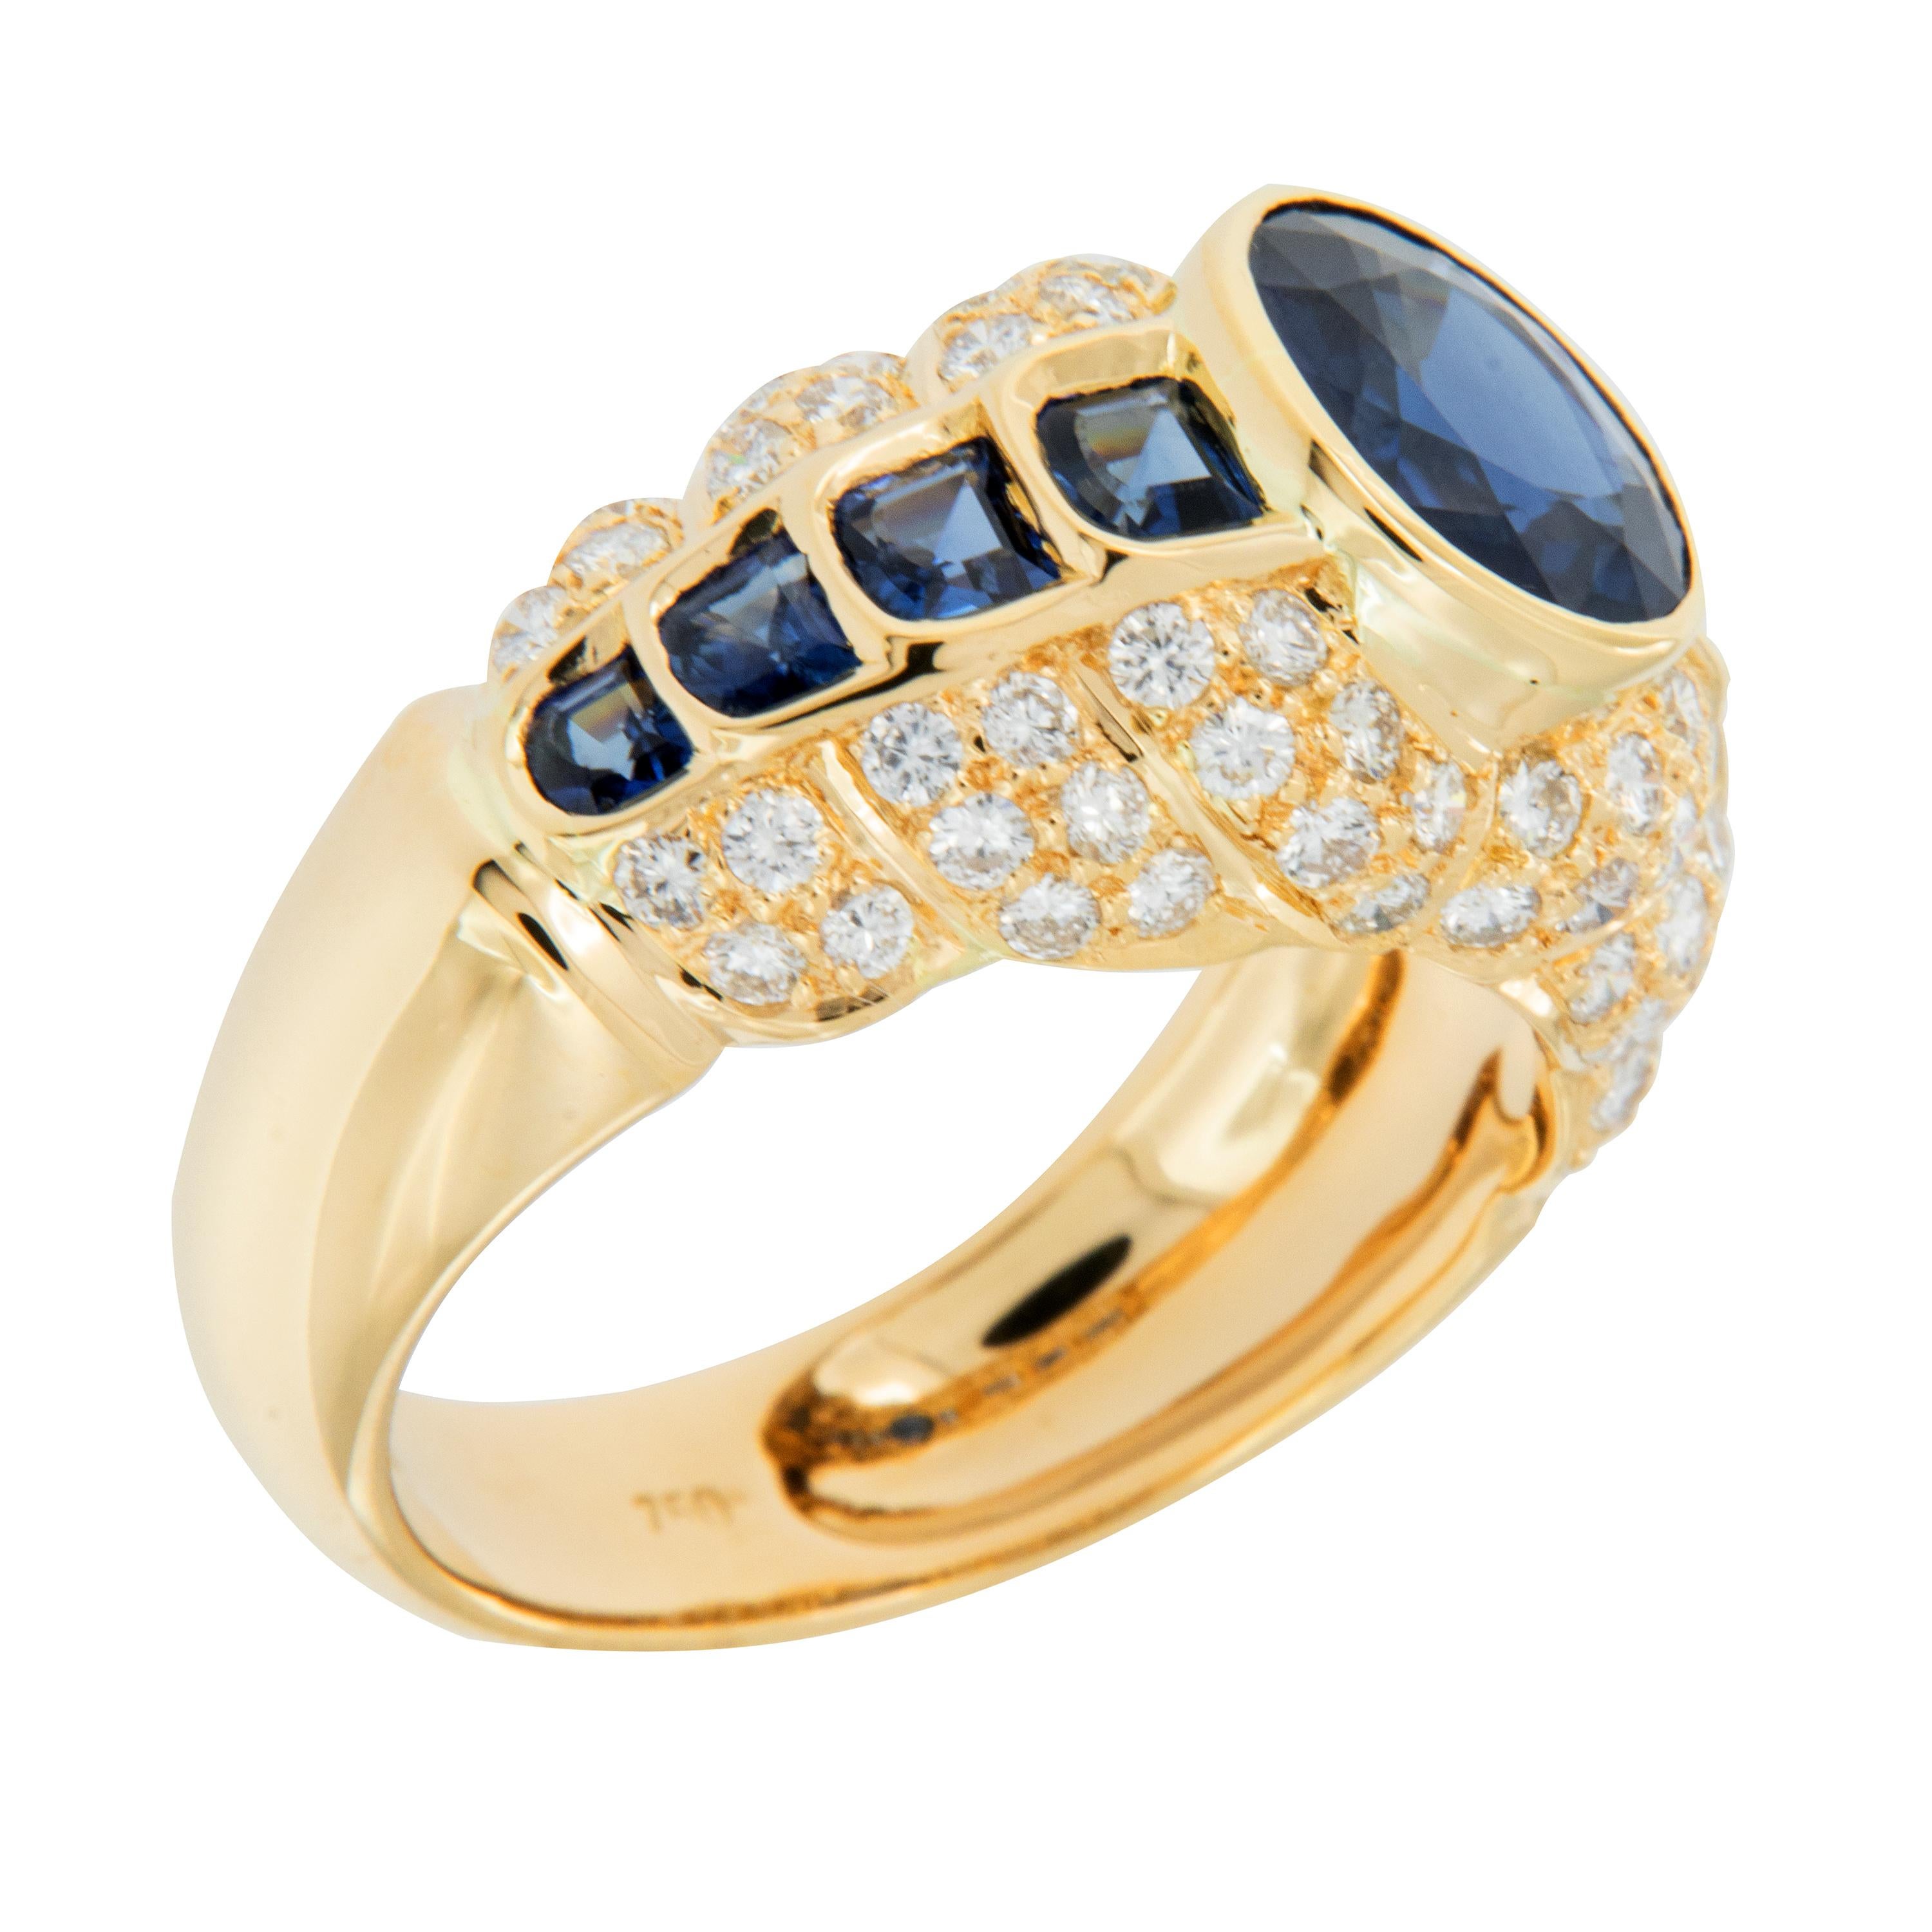  The ancient Persians believed that the earth rested on a giant sapphire and its reflection colored the sky. Own your own piece of the sky with this stunning sapphire & diamond ring! The graceful dome shape is accented with 1 oval blue sapphire & 8